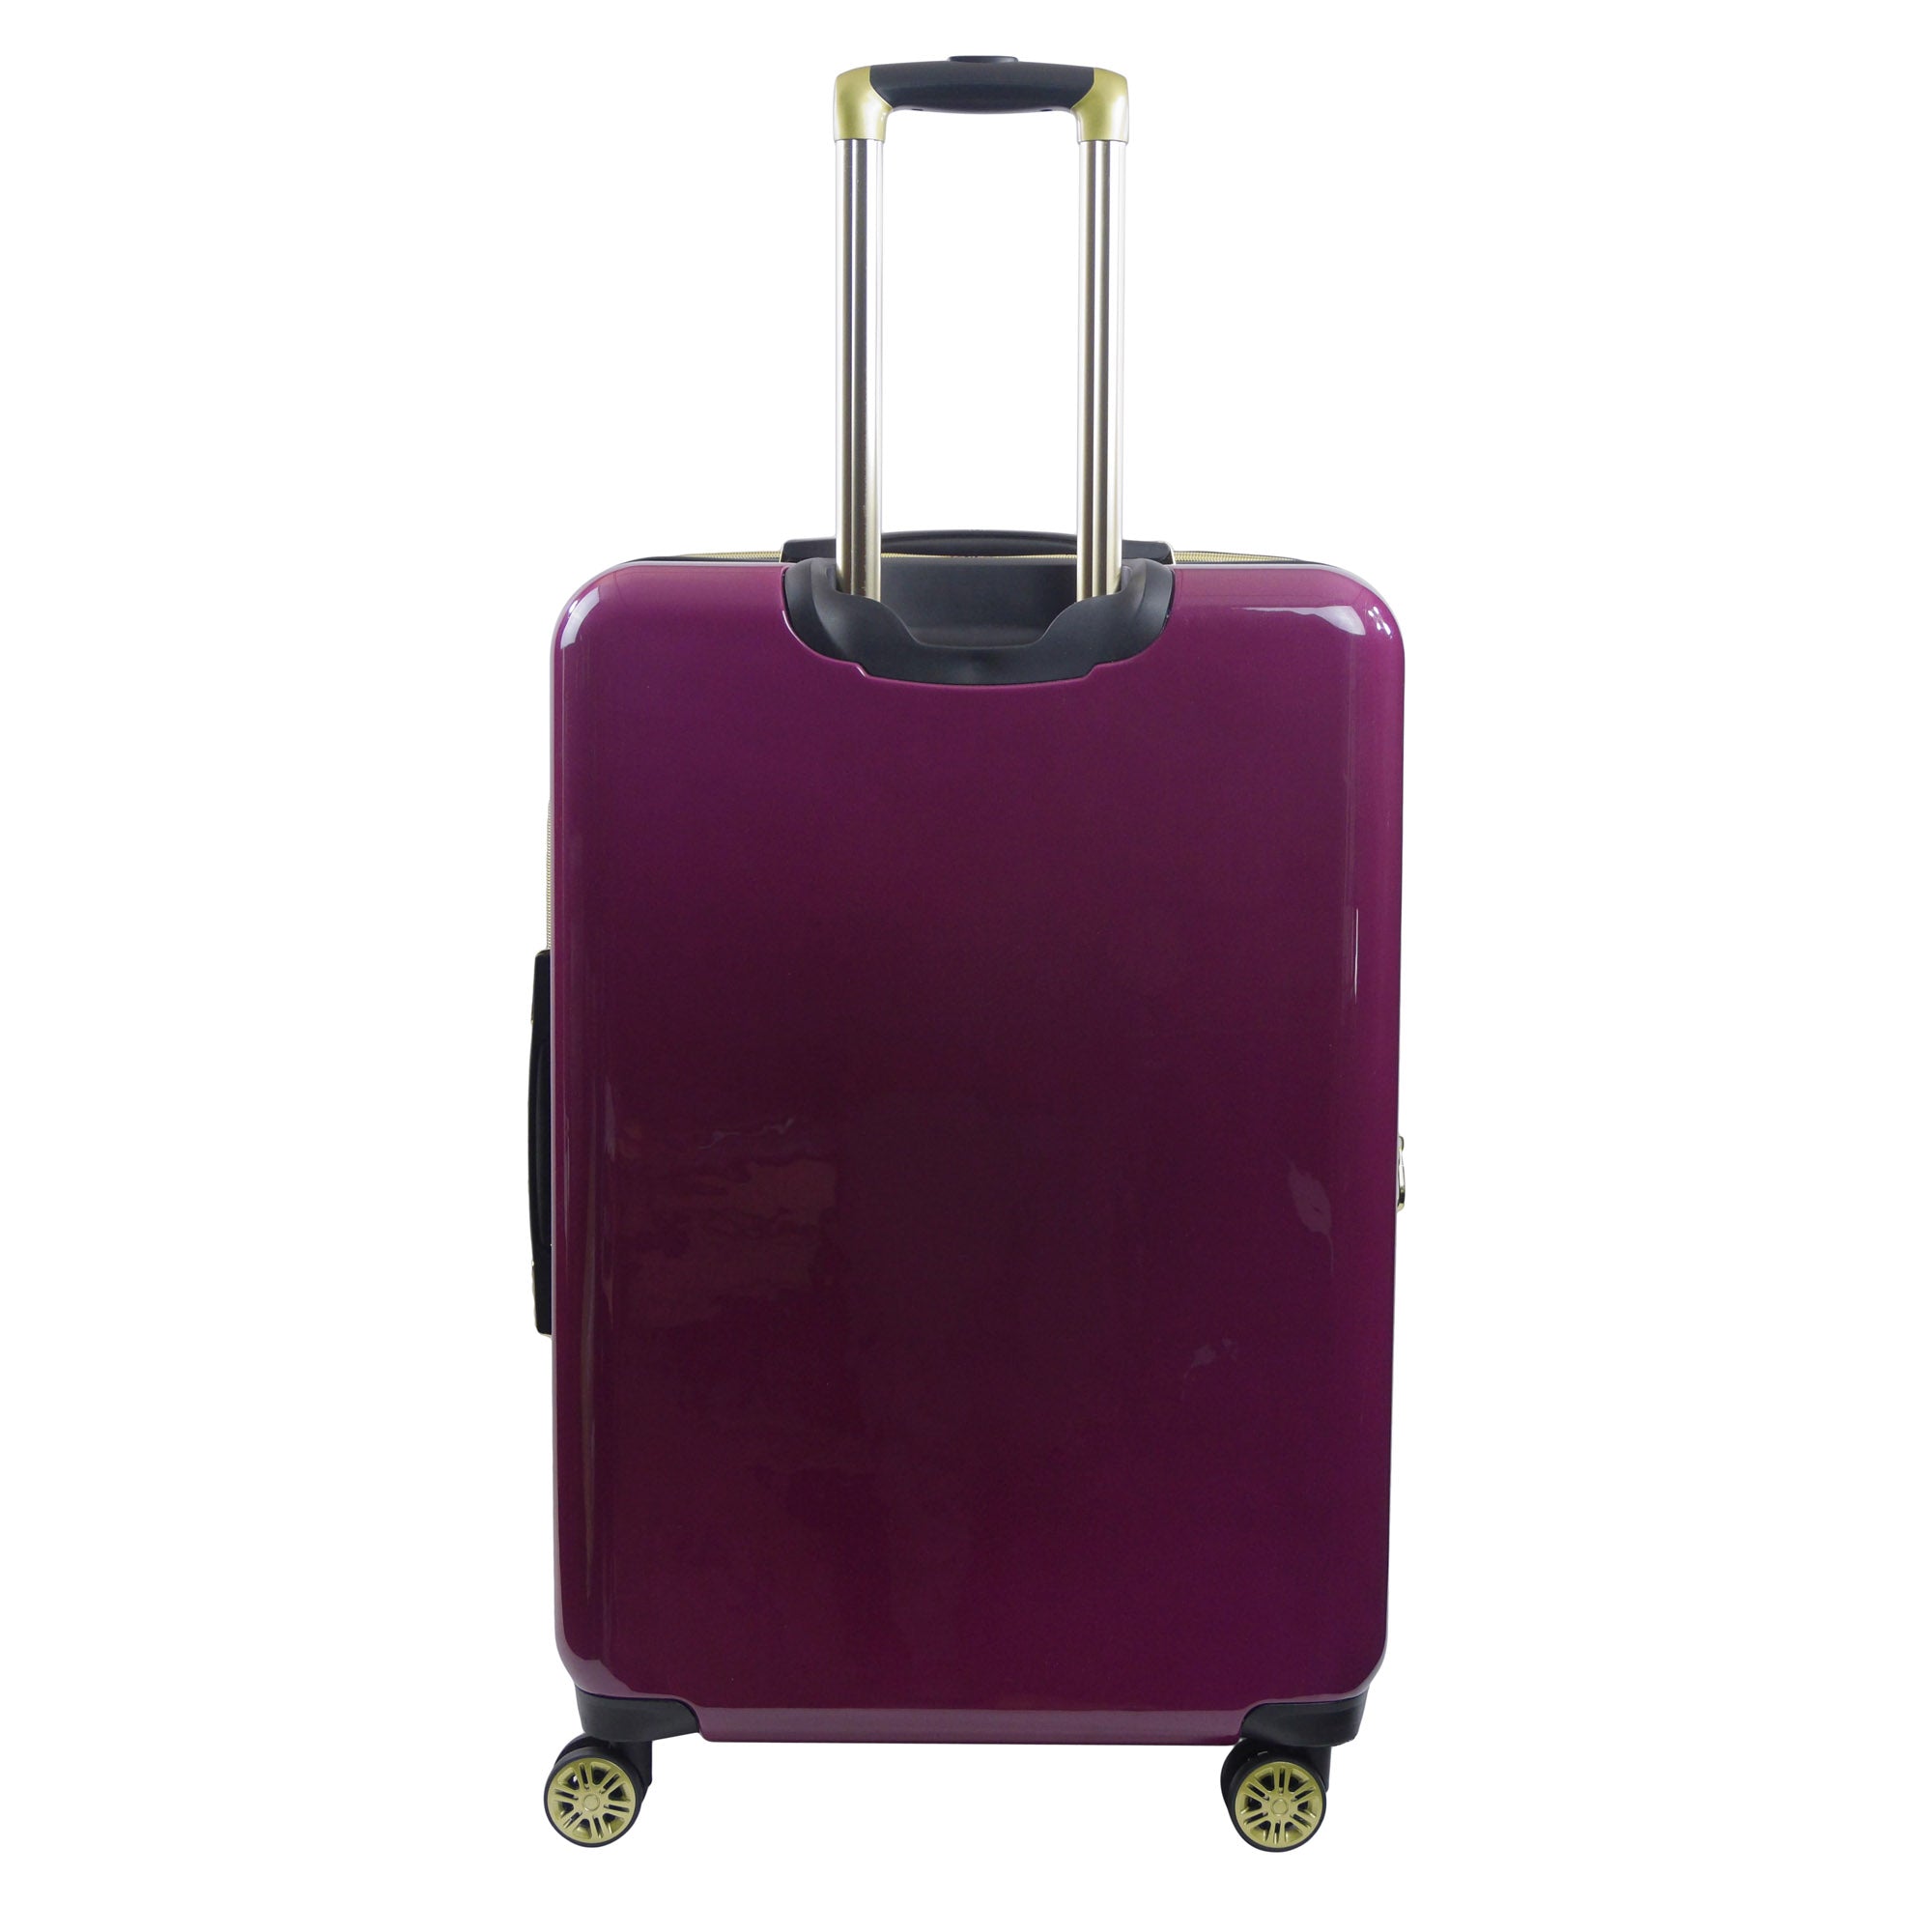 Harry Potter Hogwarts Express 29 inch checked spinner suitcase in Burgundy